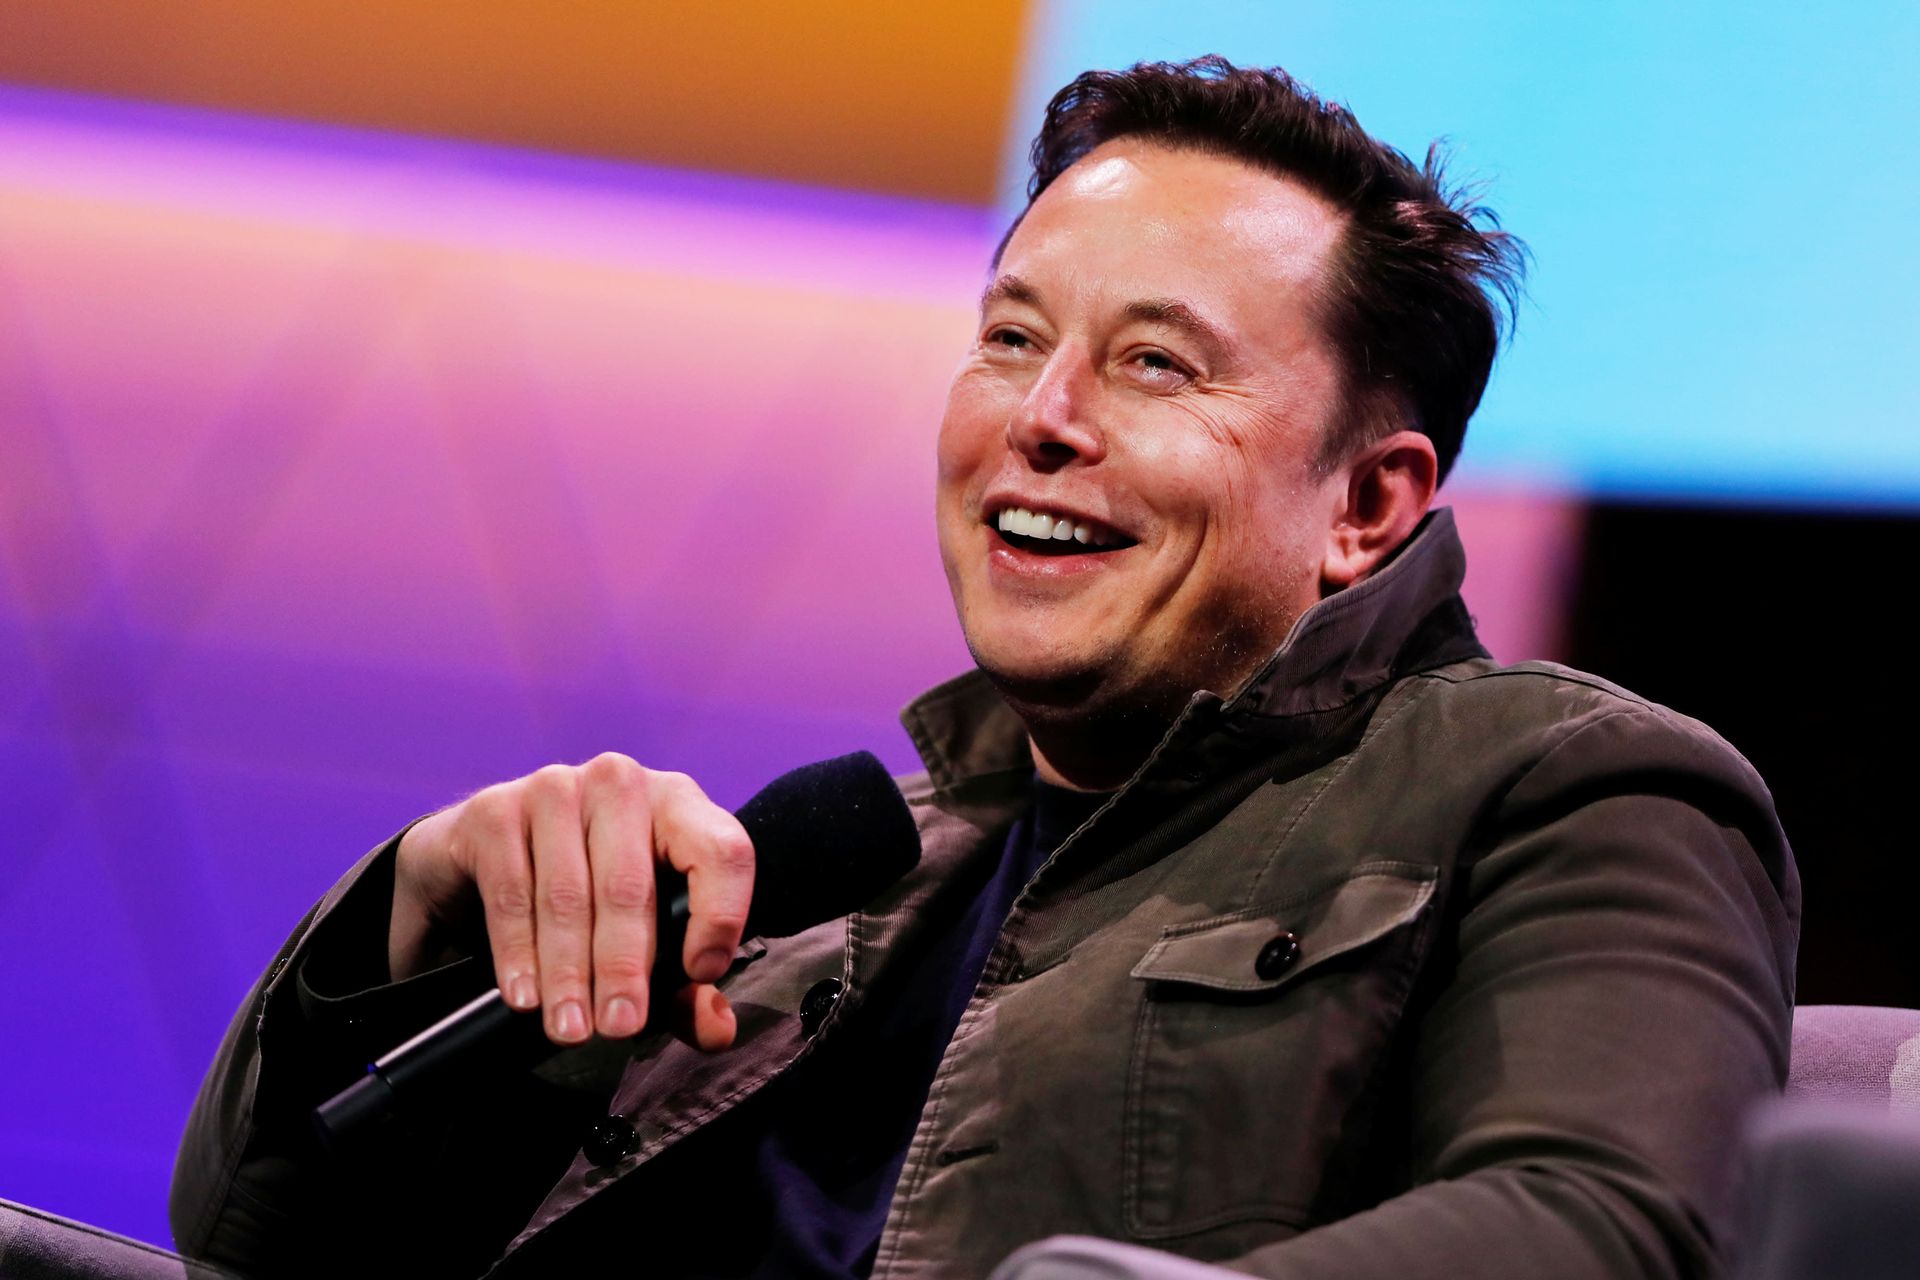 In this article, we are going to celebrate Elon Musk birthday, but also go over when was Elon Musk a billionaire, is Elon Musk born rich, and Elon Musk net worth.